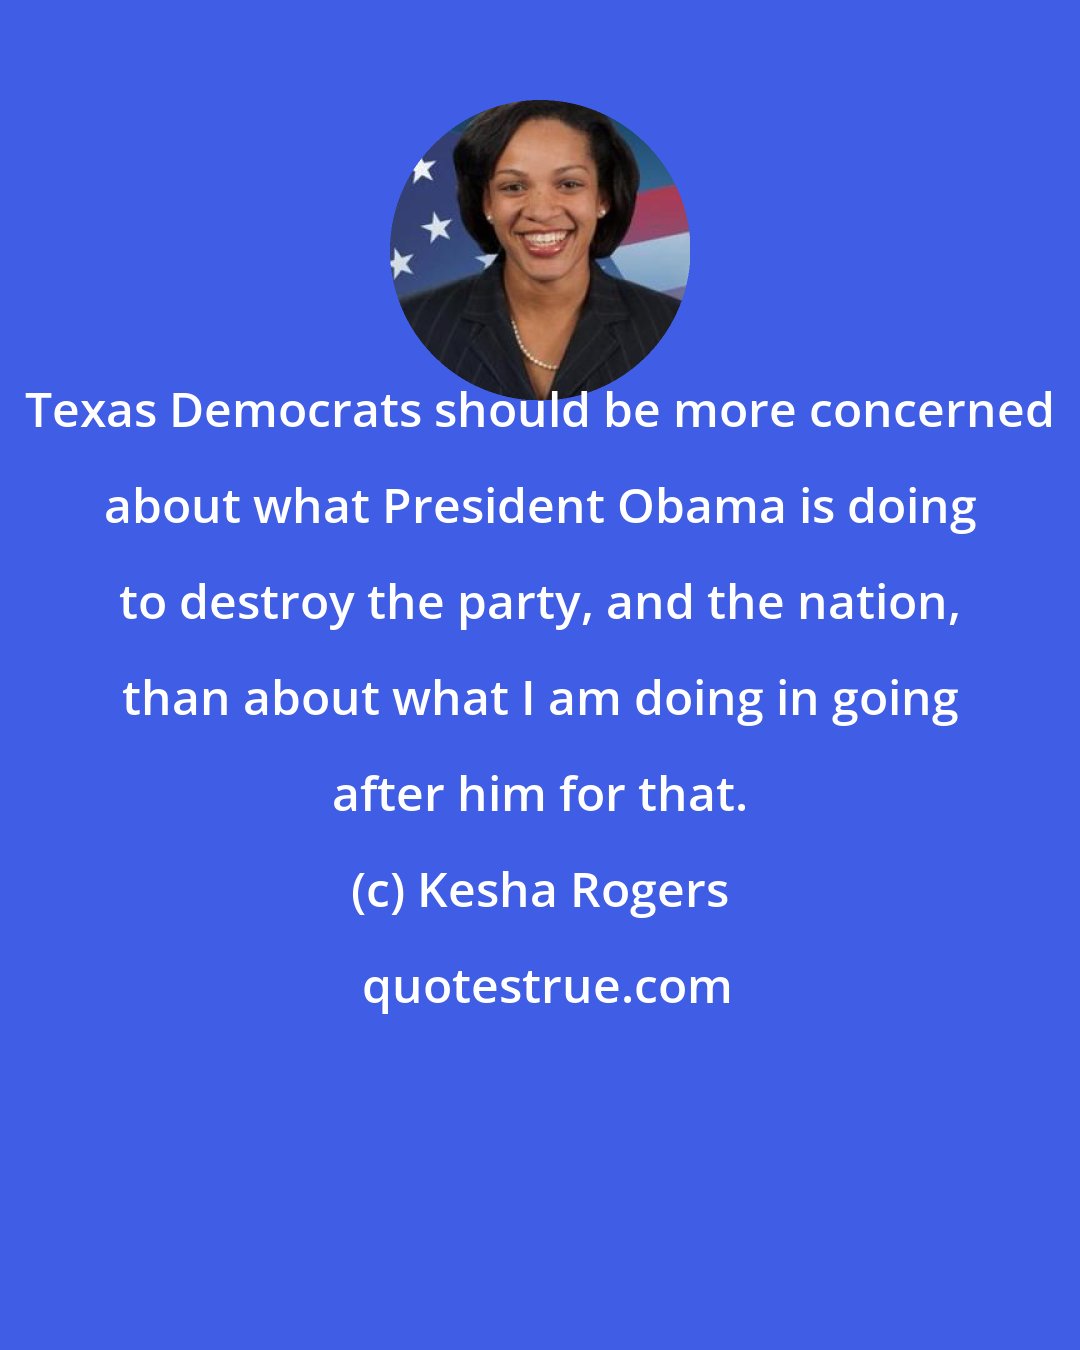 Kesha Rogers: Texas Democrats should be more concerned about what President Obama is doing to destroy the party, and the nation, than about what I am doing in going after him for that.